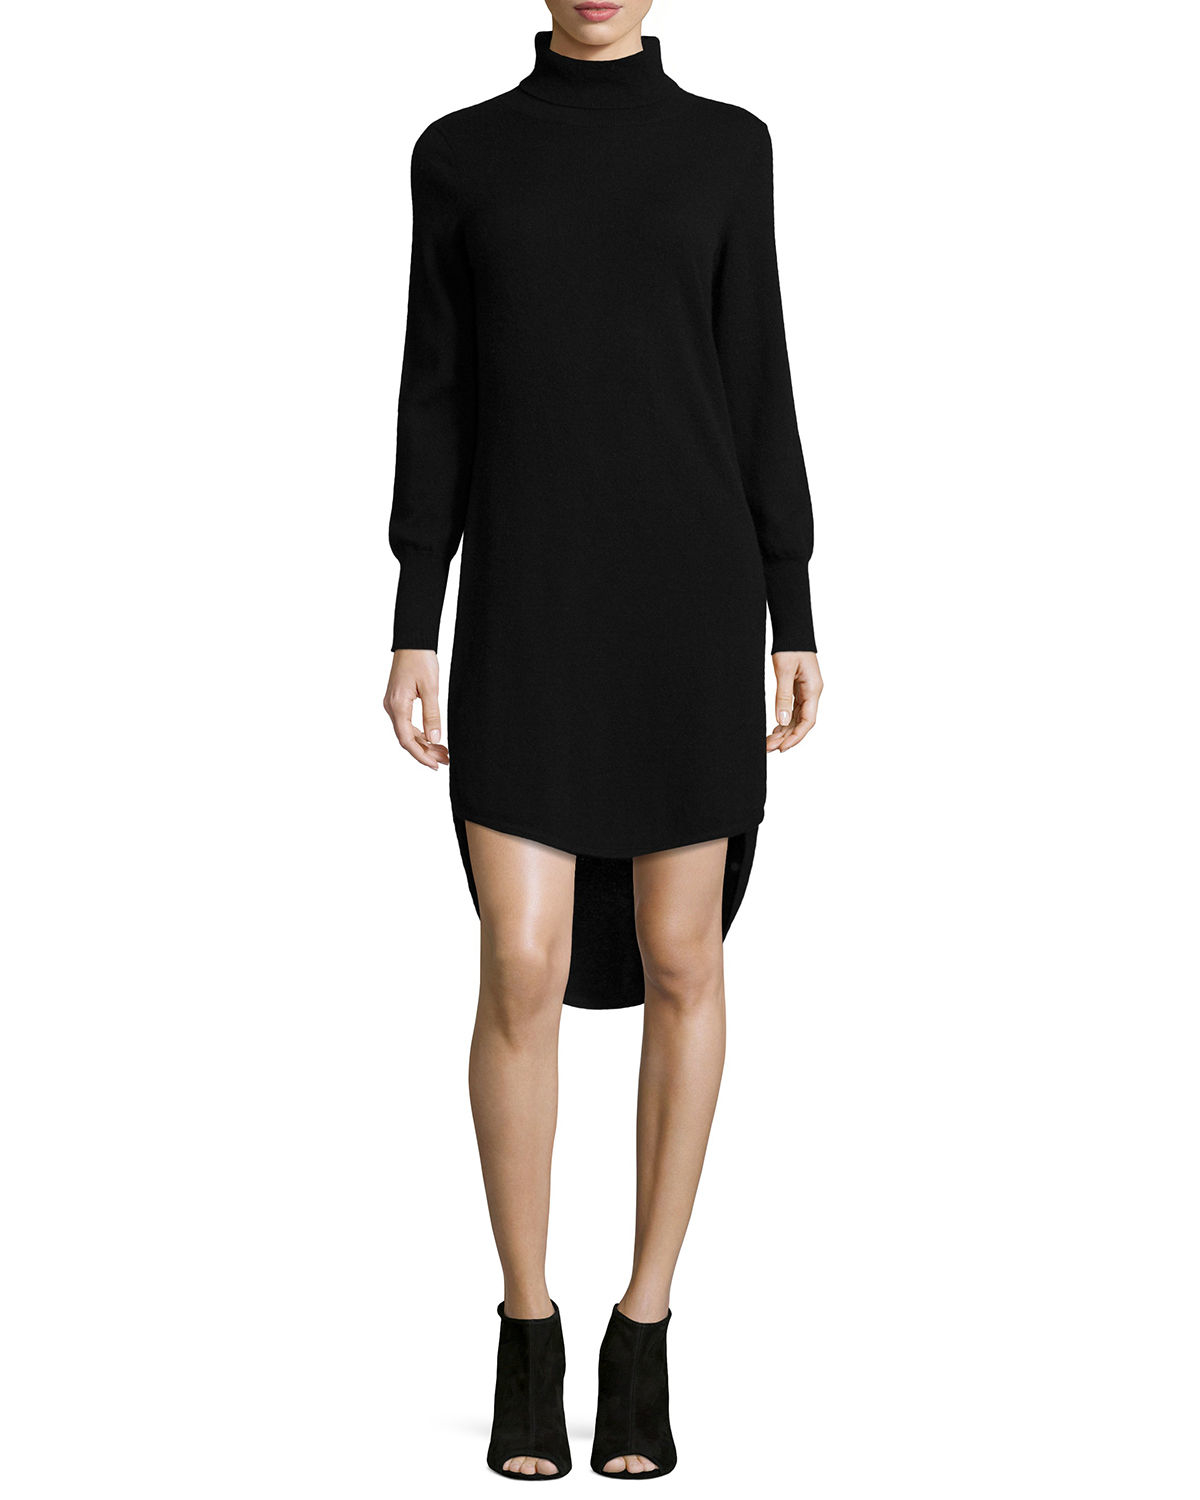 Neiman Marcus Cashmere Collection Roll-Neck Cashmere Dress in Black | Lyst